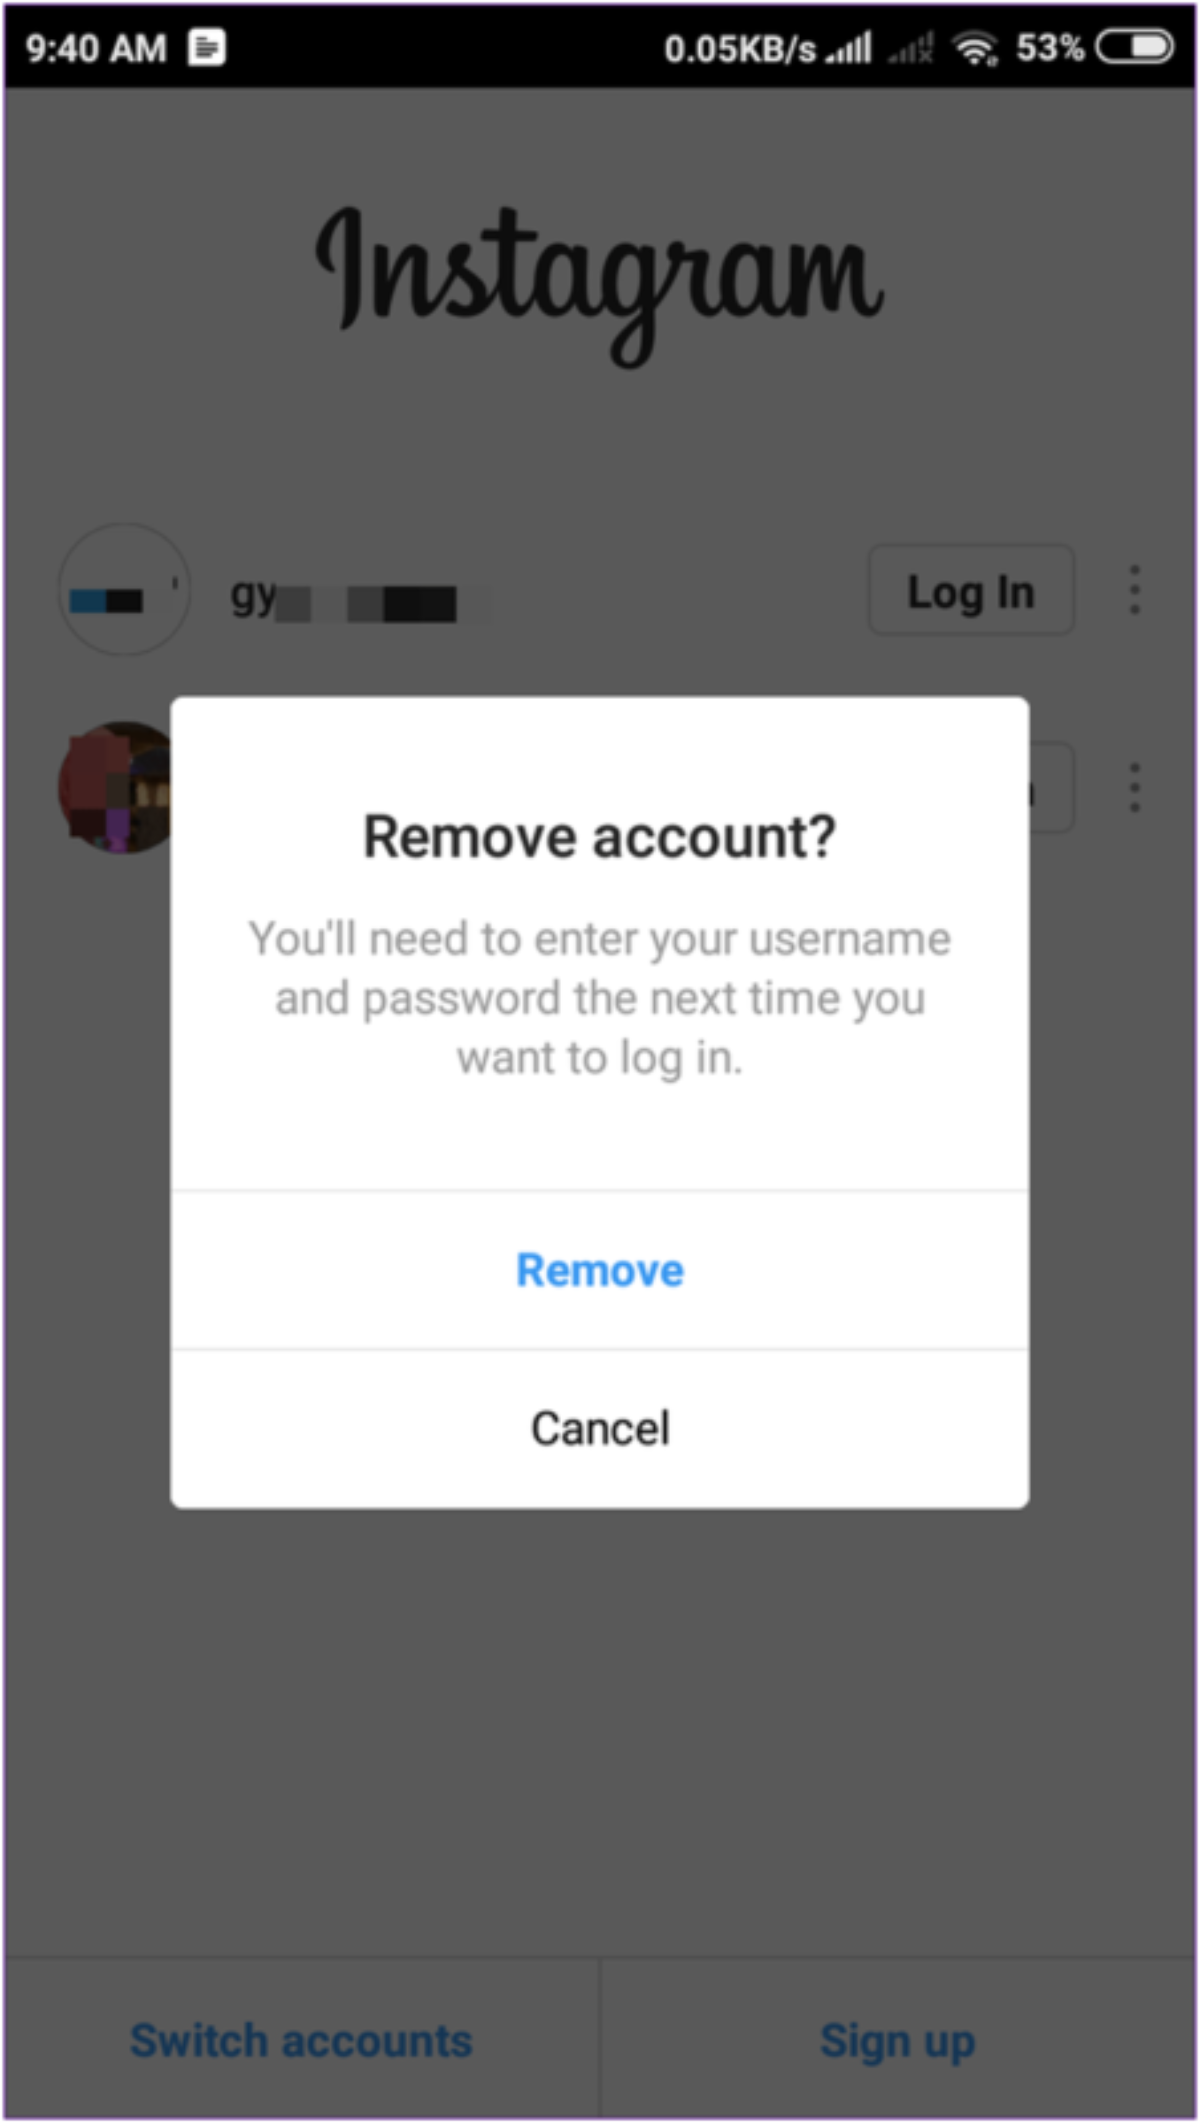 How to remove remembered accounts on Instagram with five simple steps: